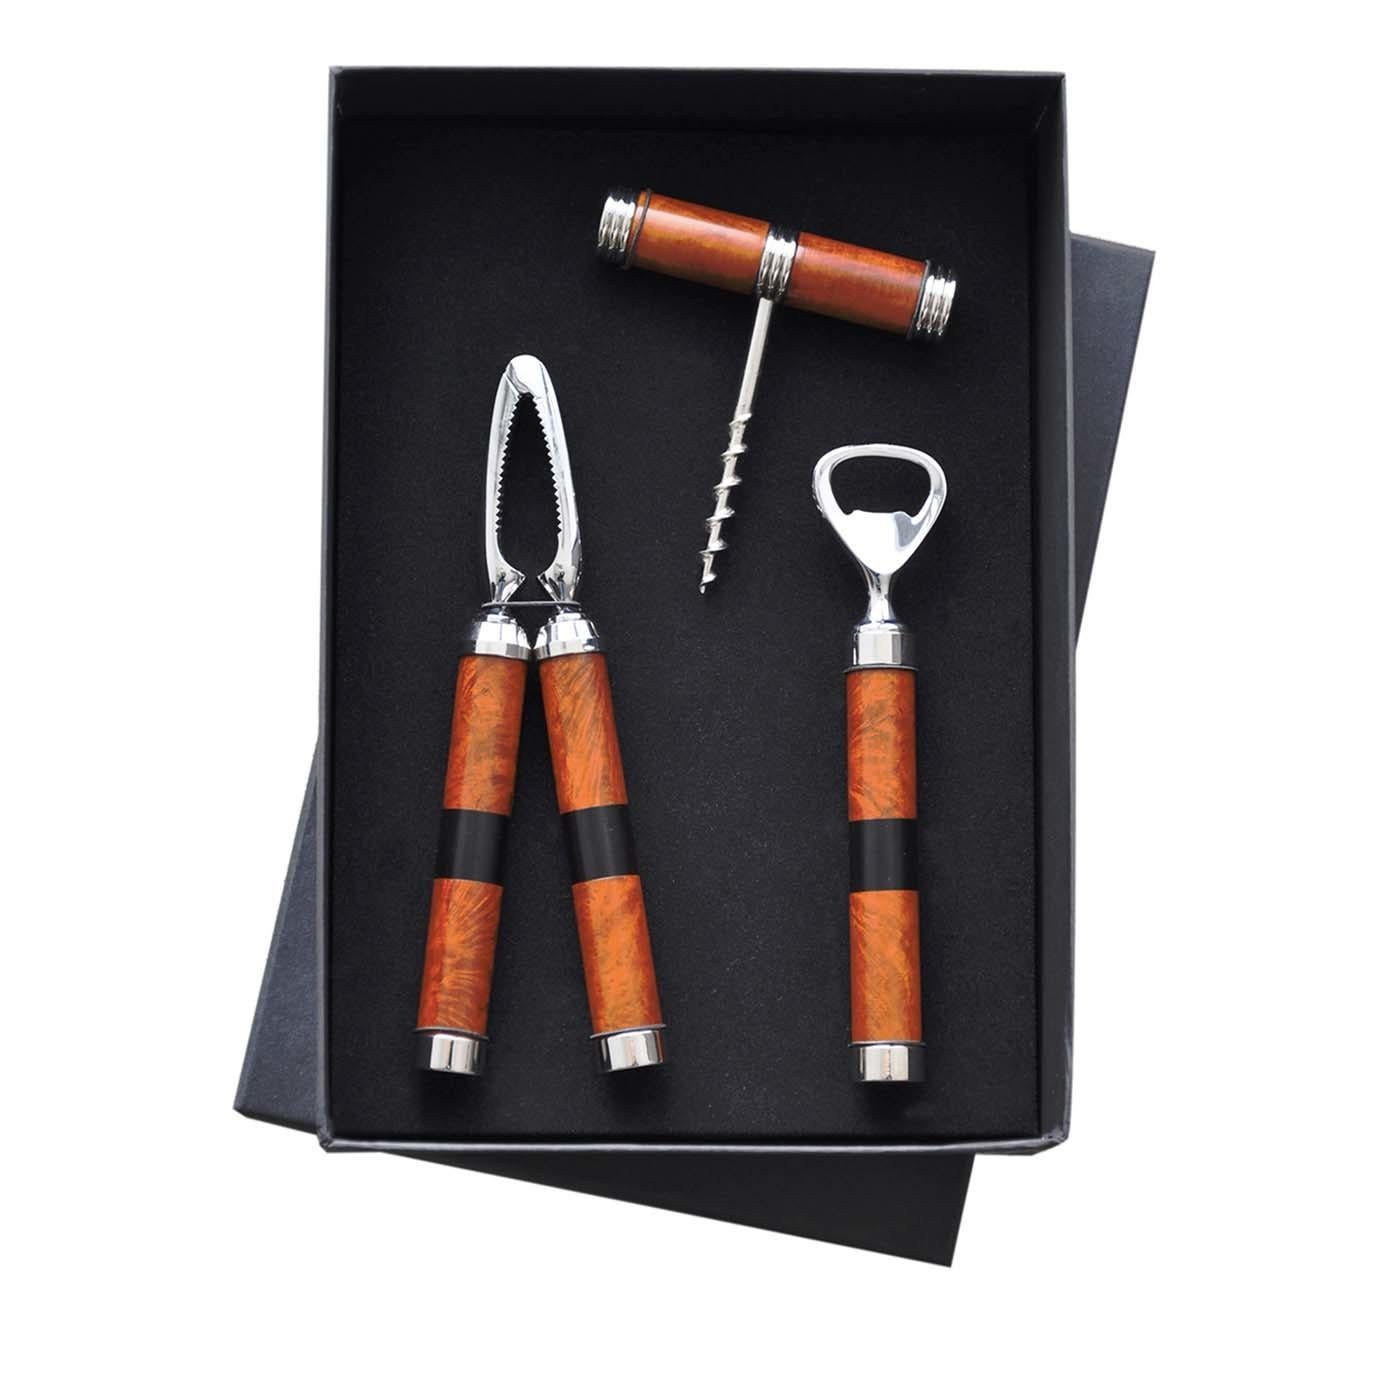 Part of a collection of entertaining accessories inspired by Art Deco, this set of bar accessories by Nino Basso features handles in durable briar root, accented with small strips of ebony. The set includes a corkscrew, beer bottle opener and